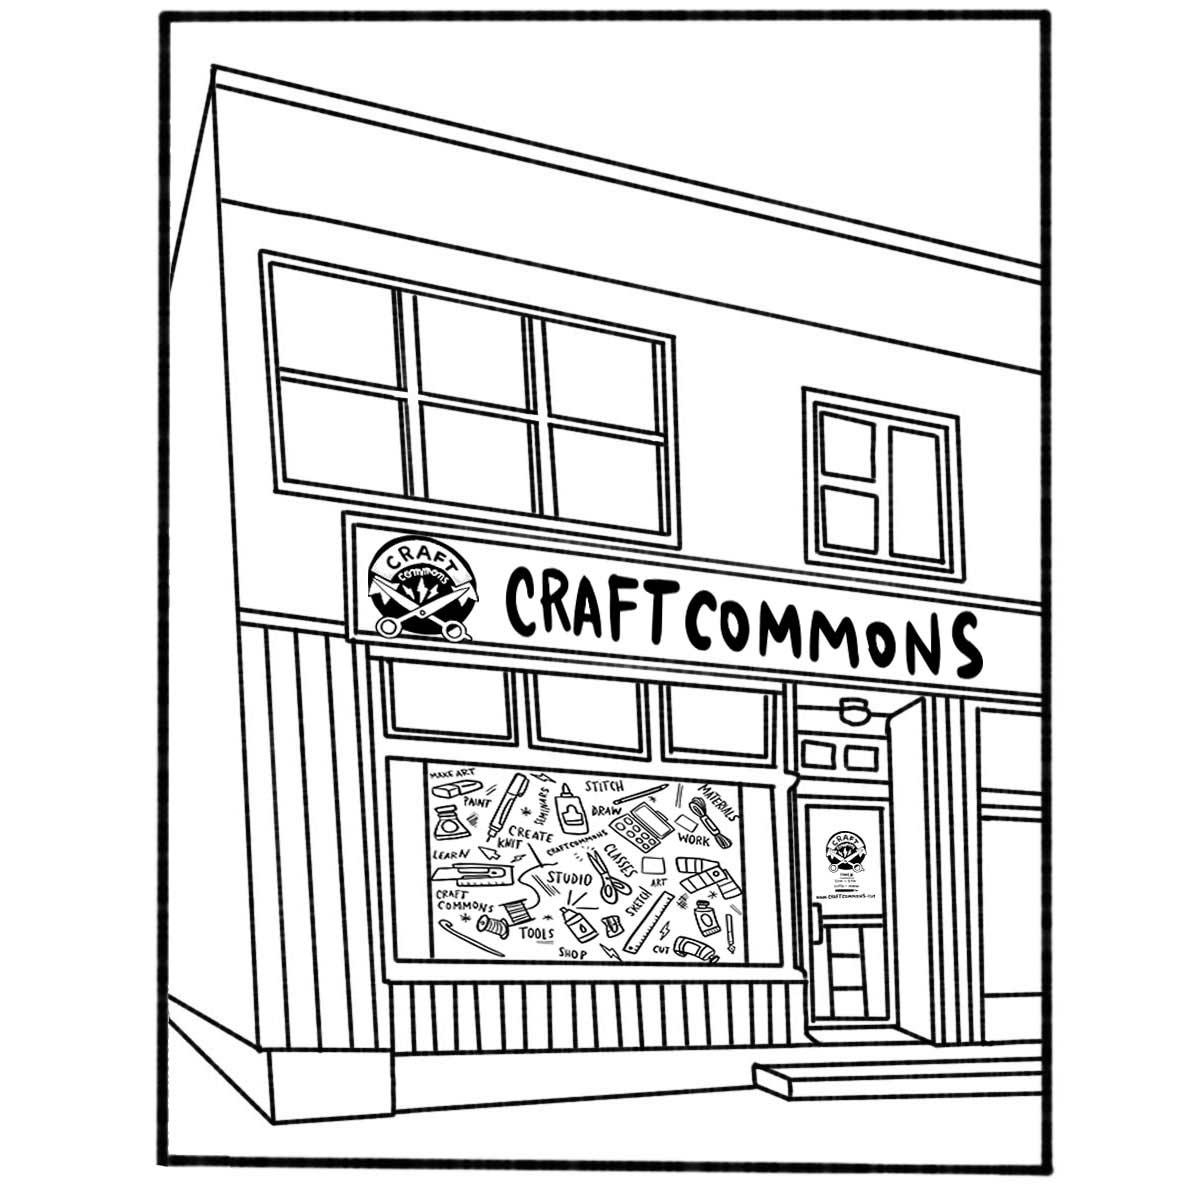 Illustrated mockup of the Craft Commons storefront front side angle